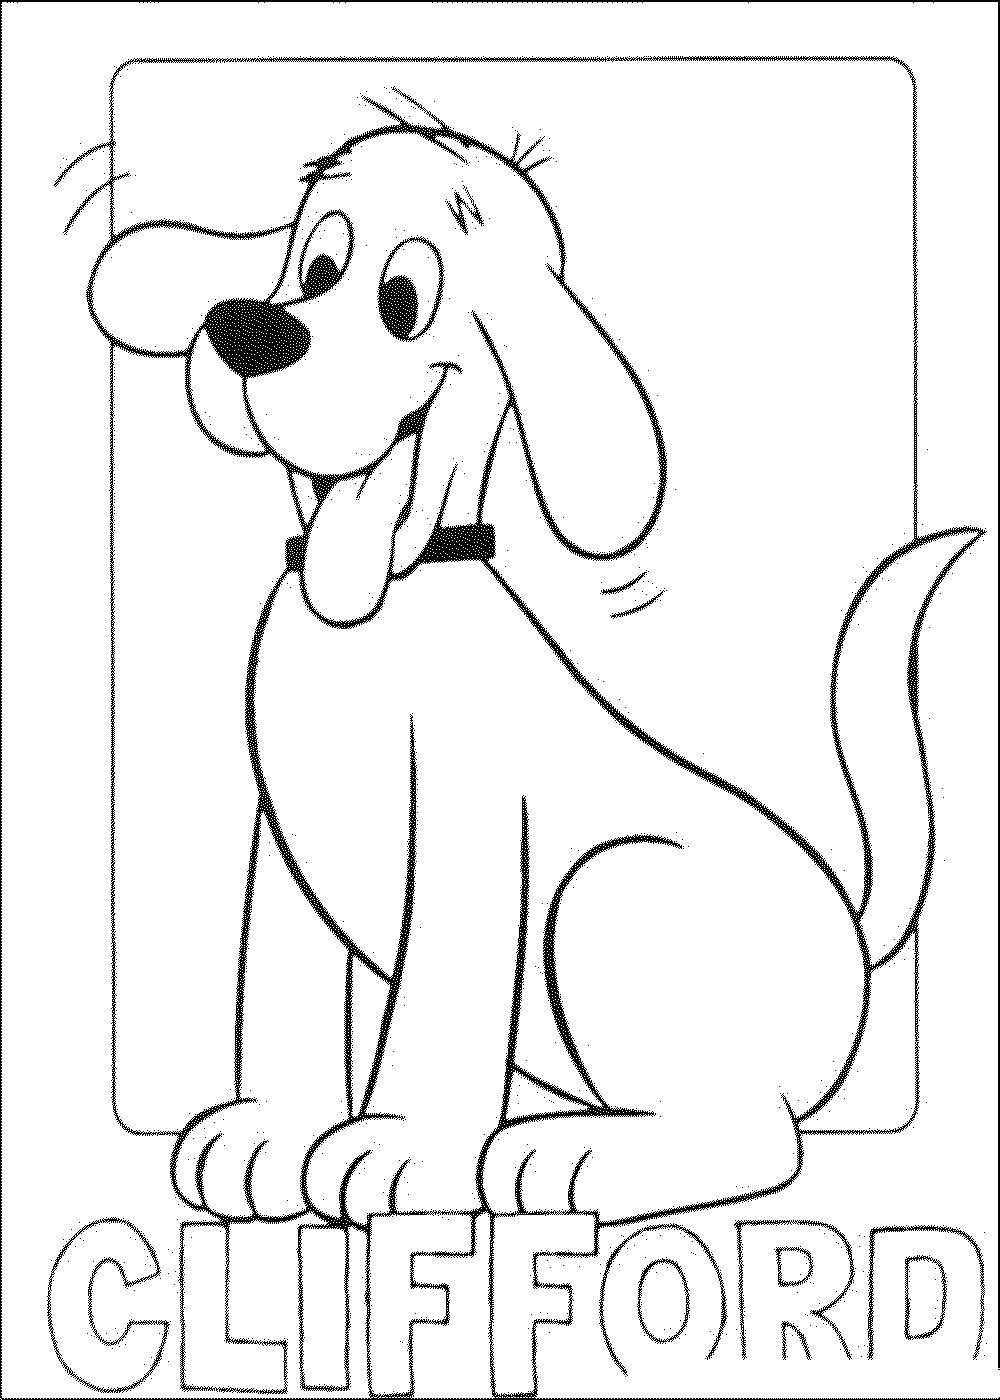 Coloring Clifford. Category Pets allowed. Tags:  animals, dogs.